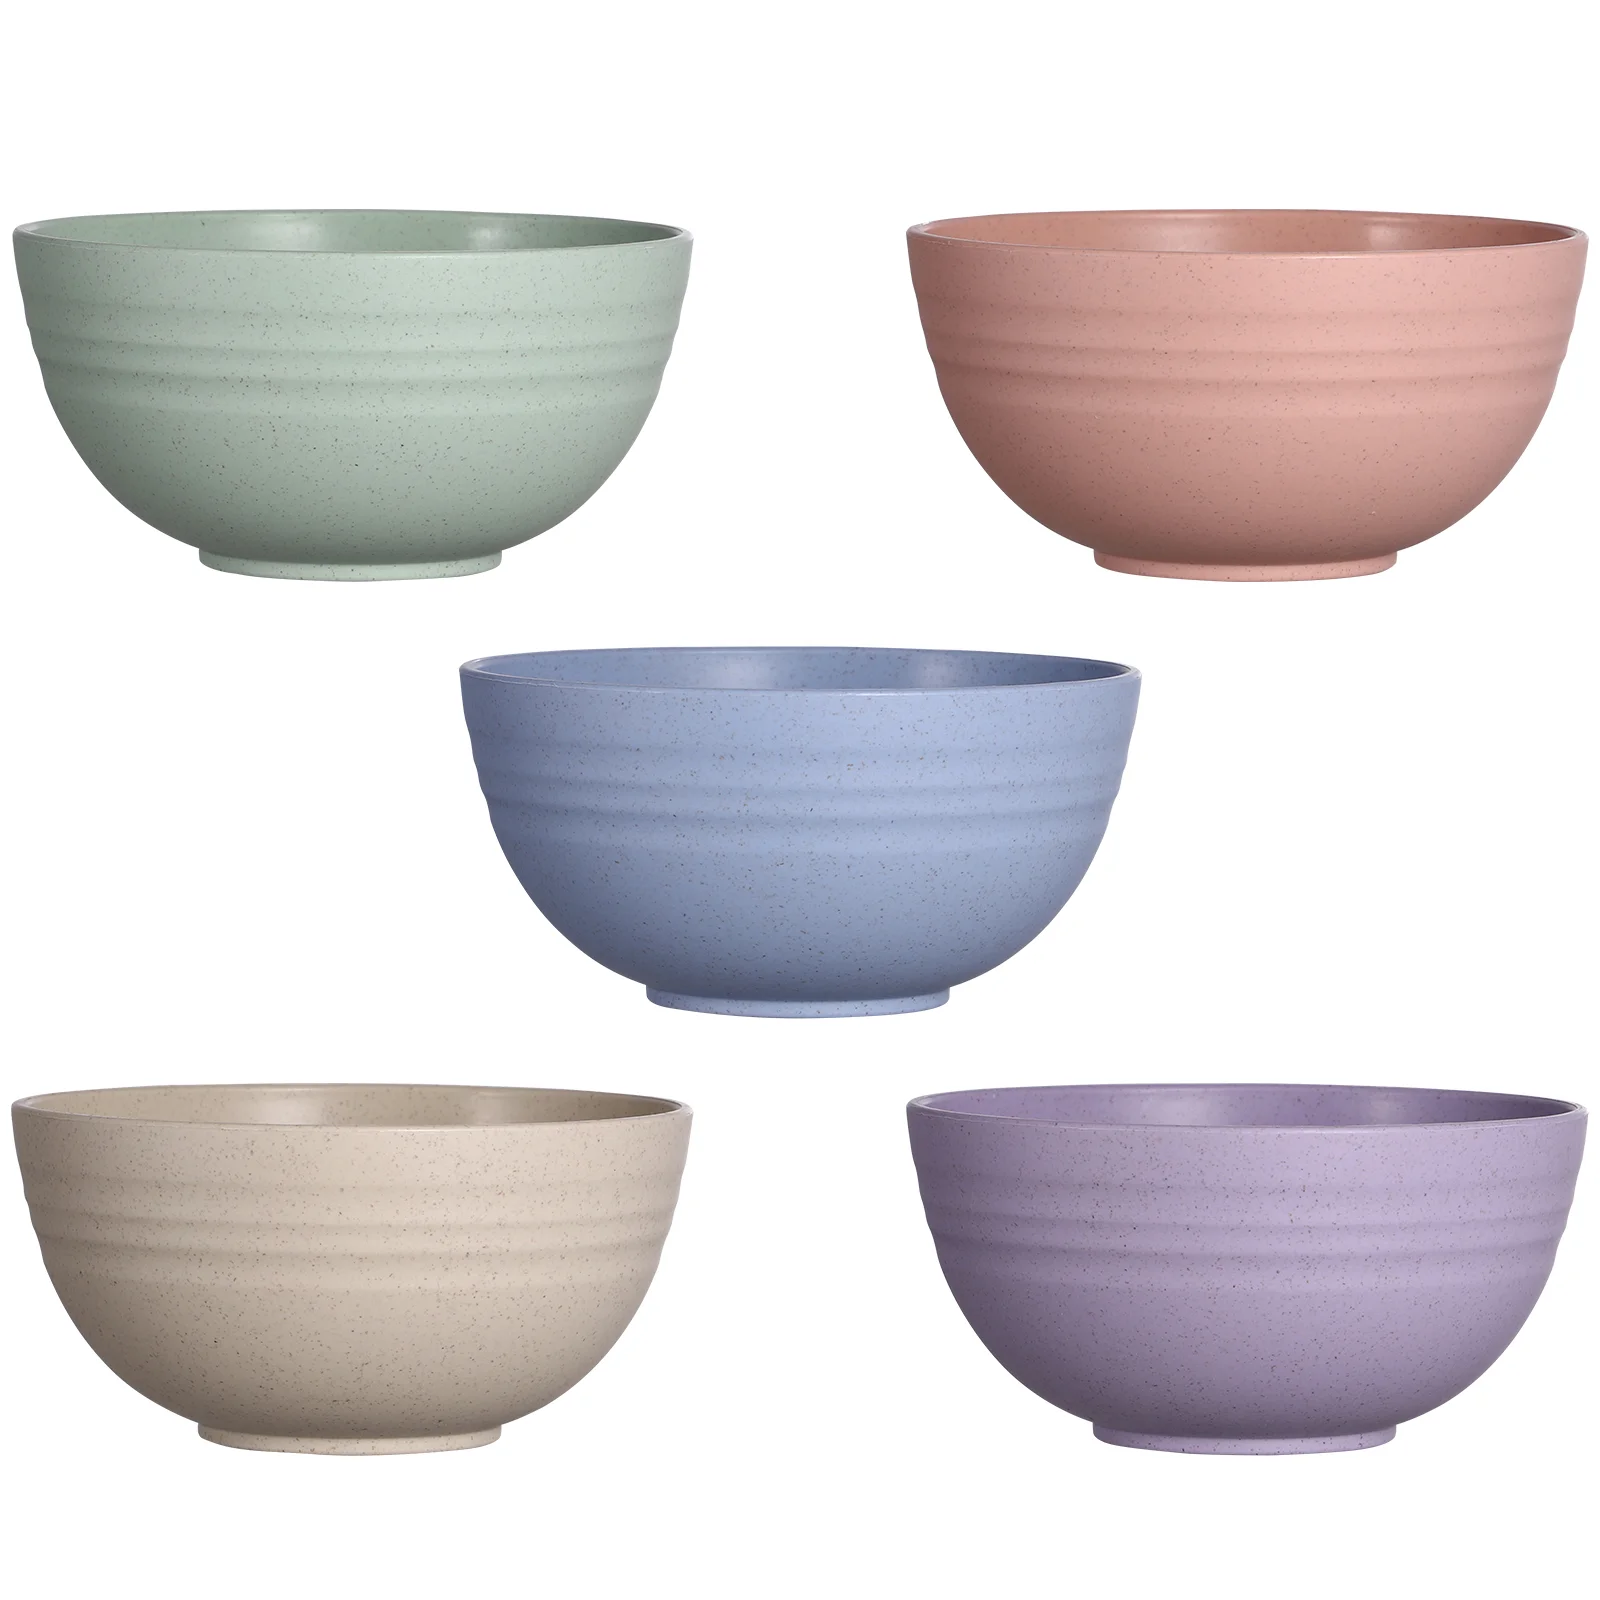 

5 unbreakable cereal bowls, wheat salad bowls, lightweight soup bowls mixing bowls noodle bowls snack bowls for kitchen camping